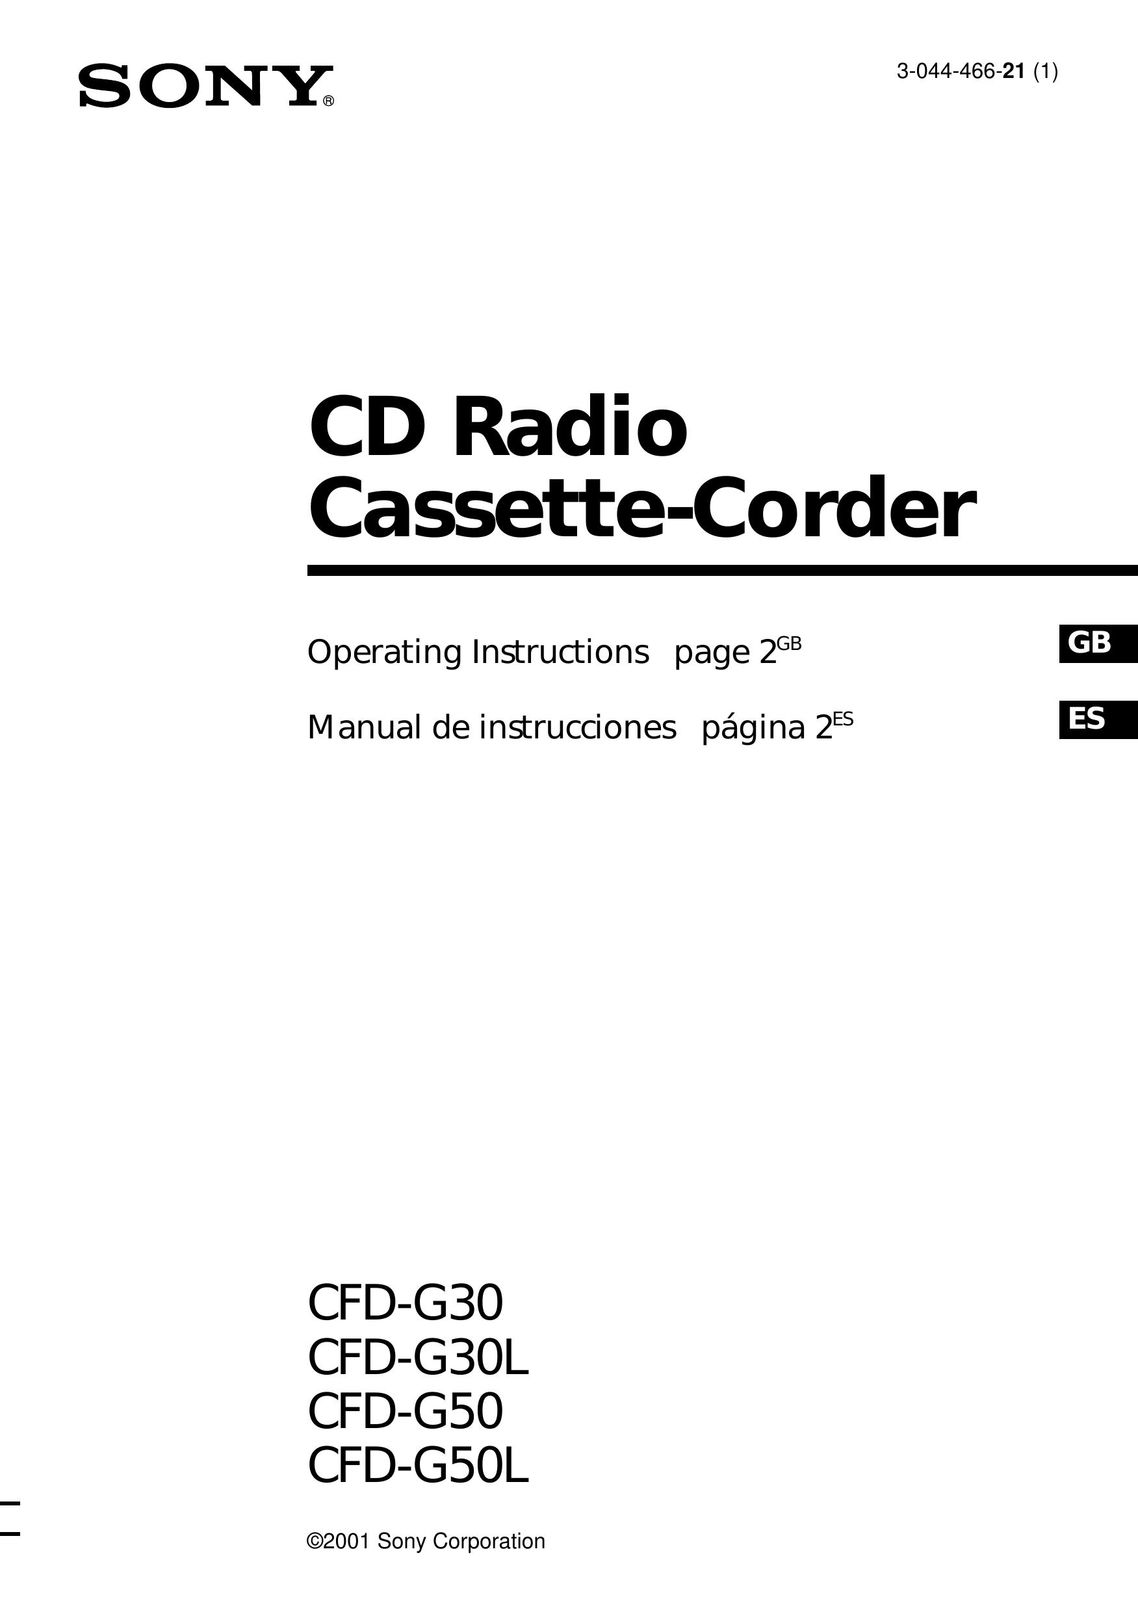 Sony CFD-G50L Cassette Player User Manual